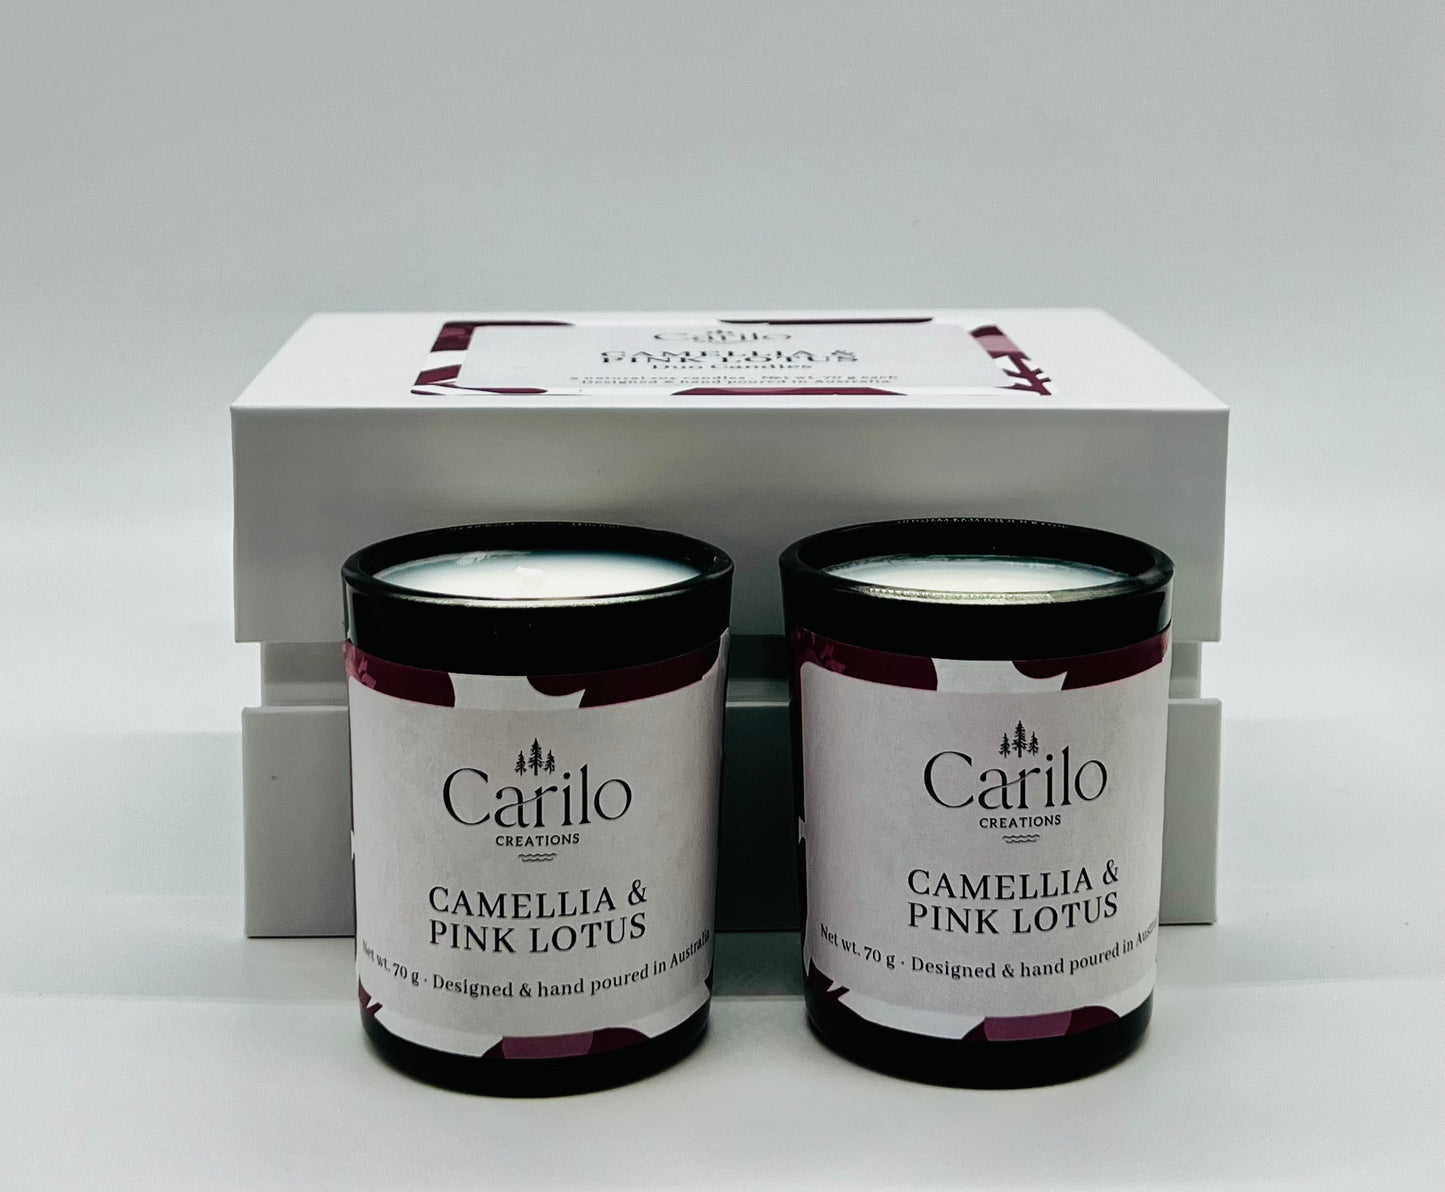 CAMELLIA & PINK LOTUS - DELUXE DUO SCENTED CANDLES - 70g each